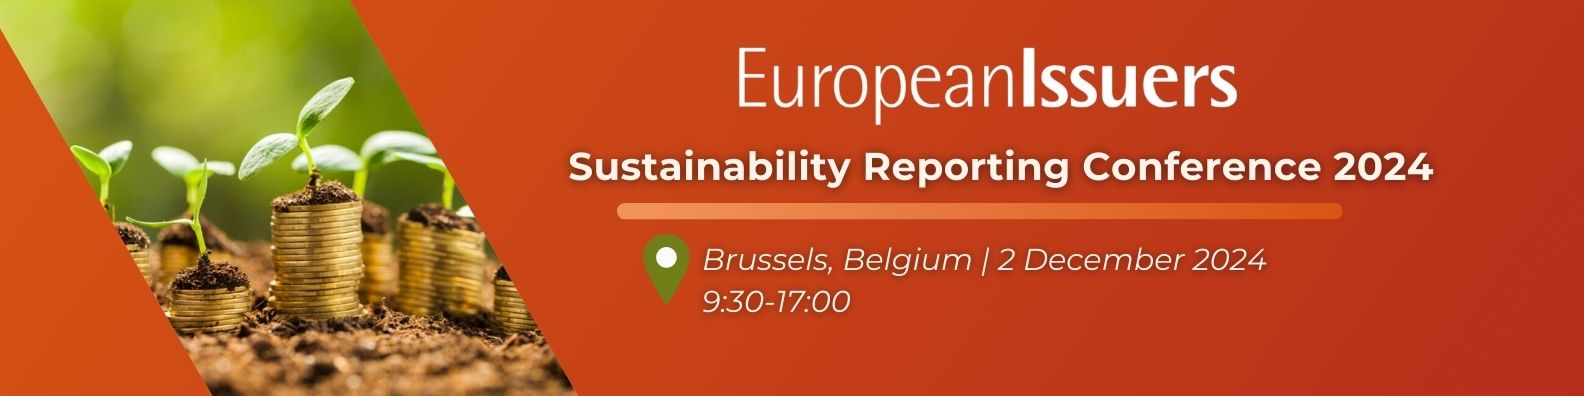 Sustainability Reporting Conference 2024 - Save the Date